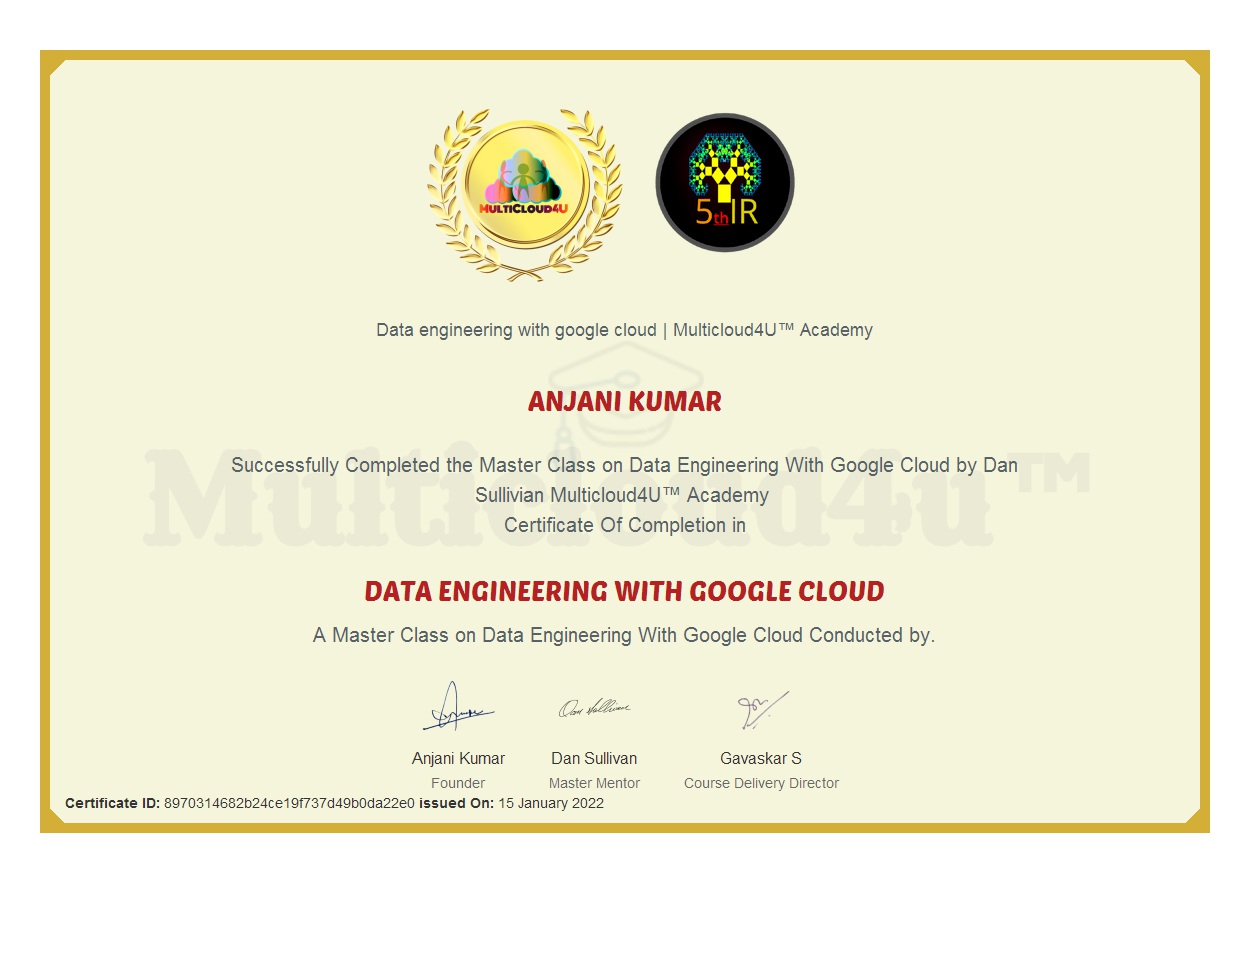 A Master Class on Data engineering with google cloud